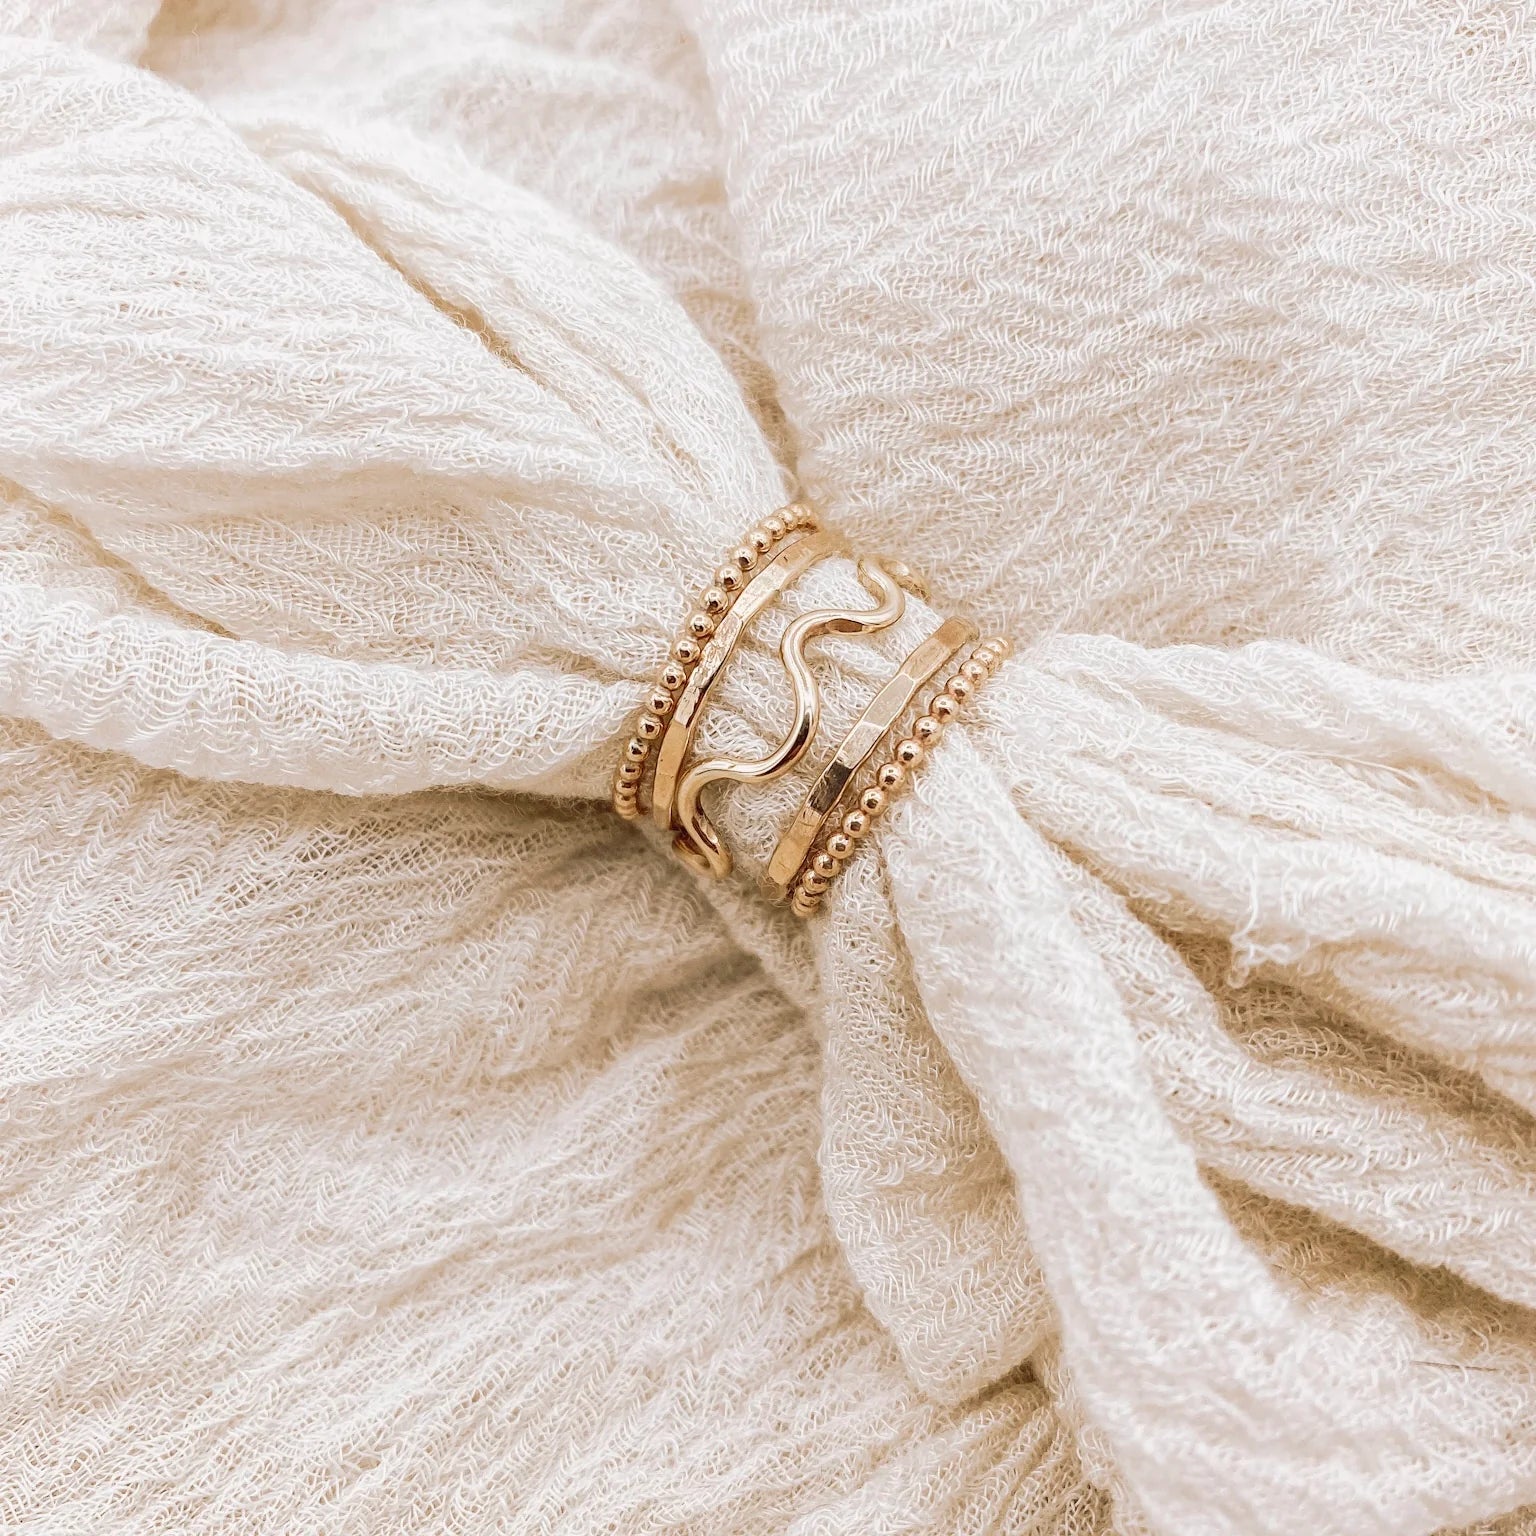 Gold Fill Stacking Ring